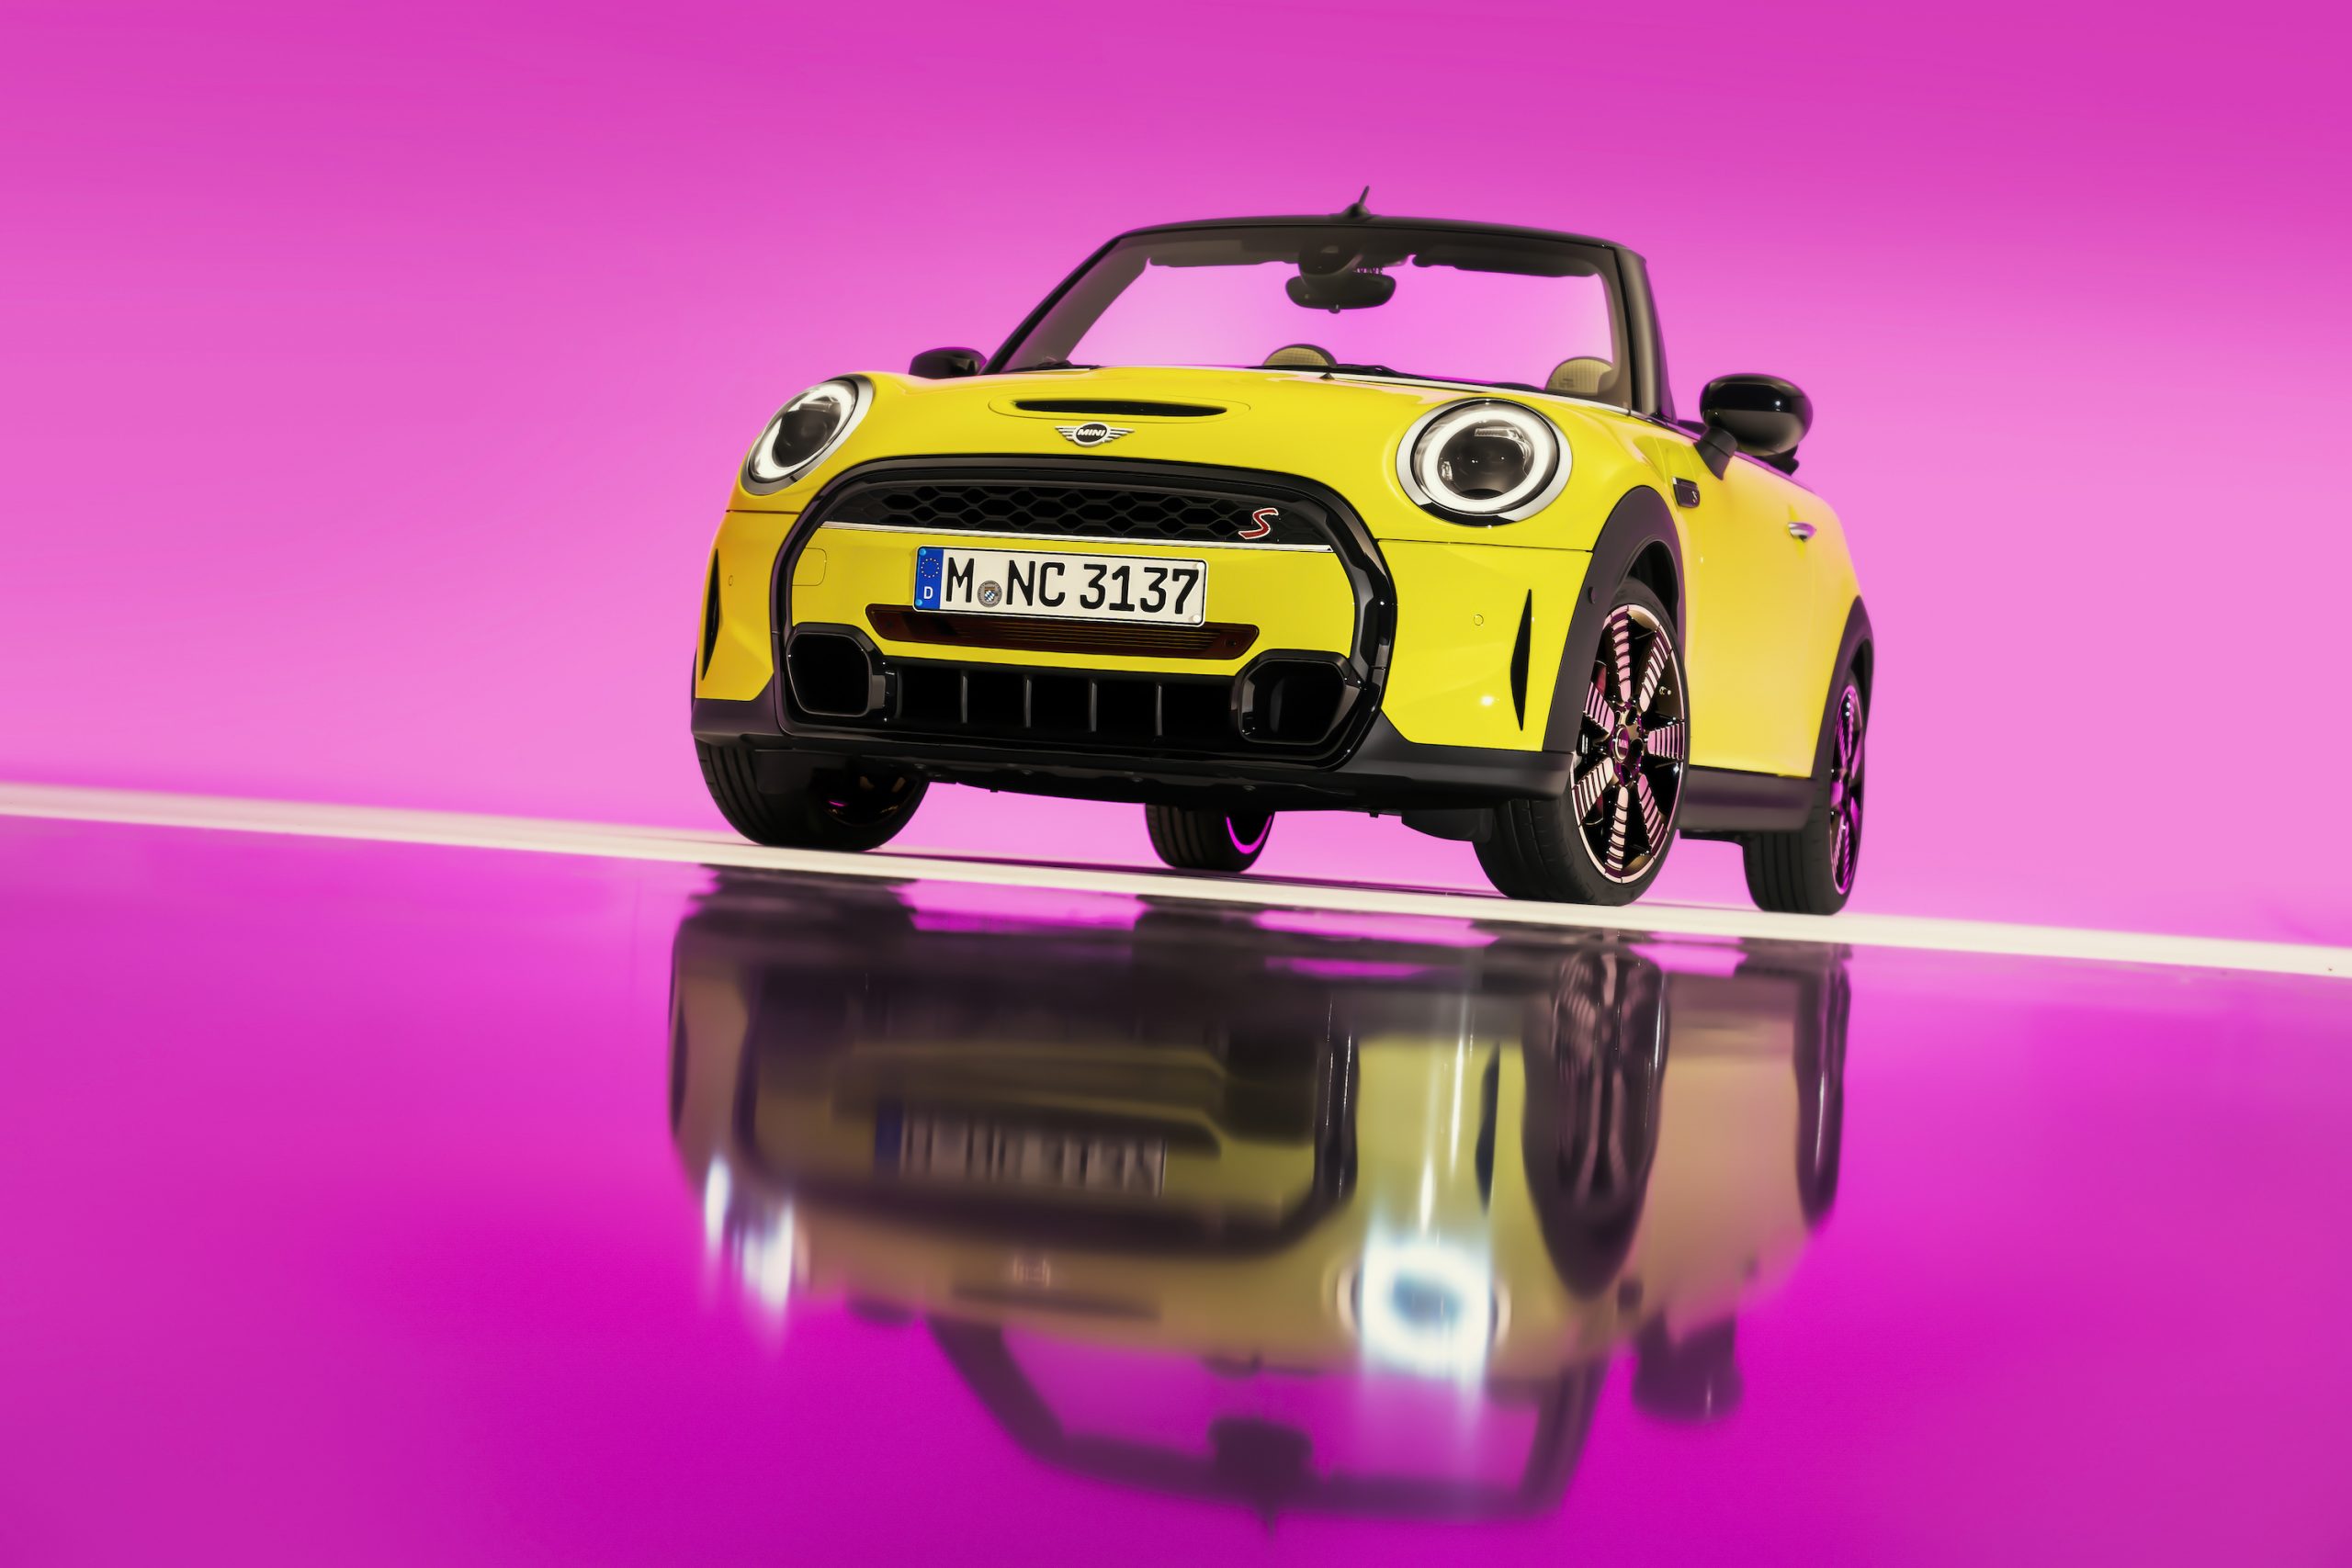 2022 Mini Cooper S convertible in yellow against a pink background